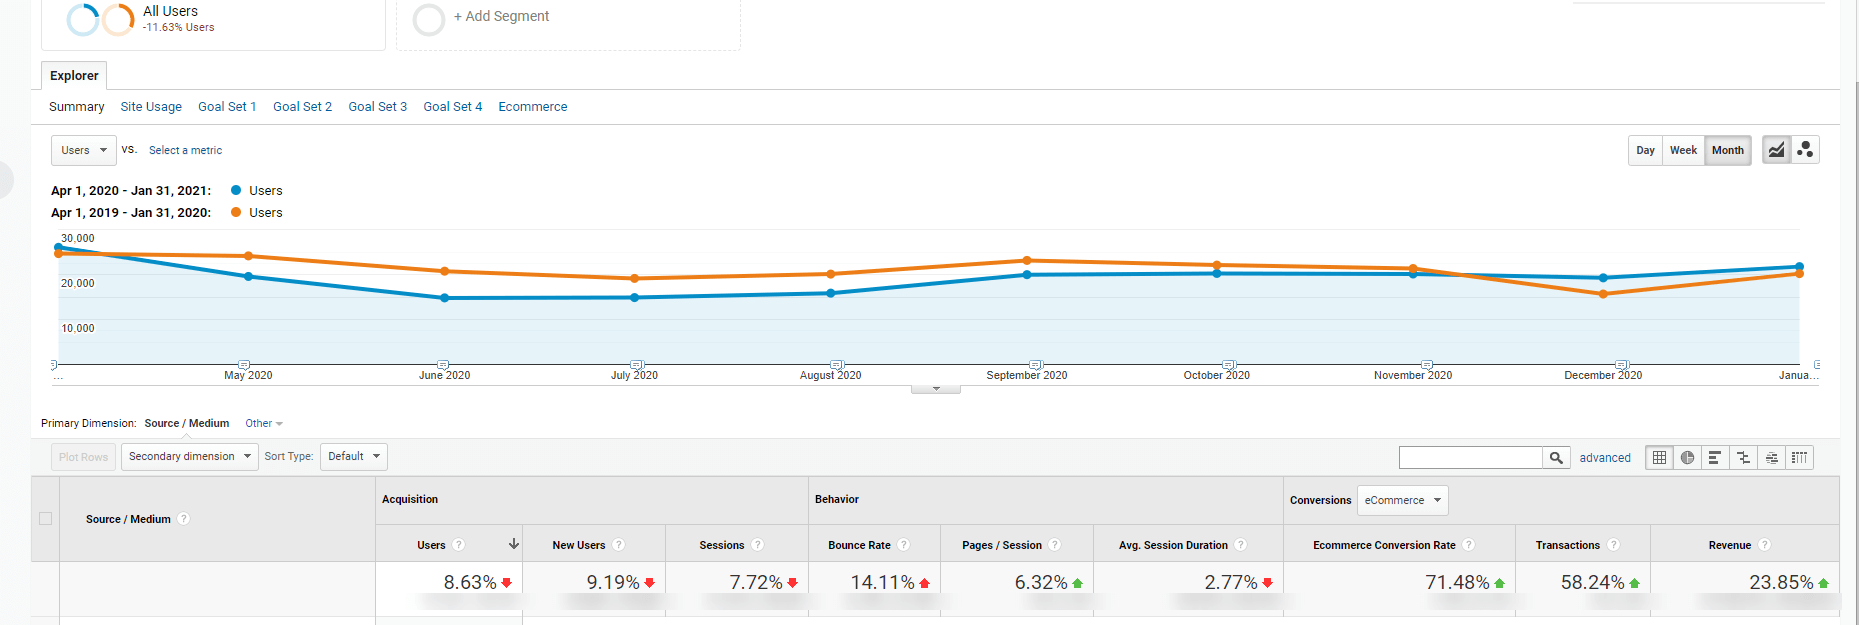 SEO improvement over time